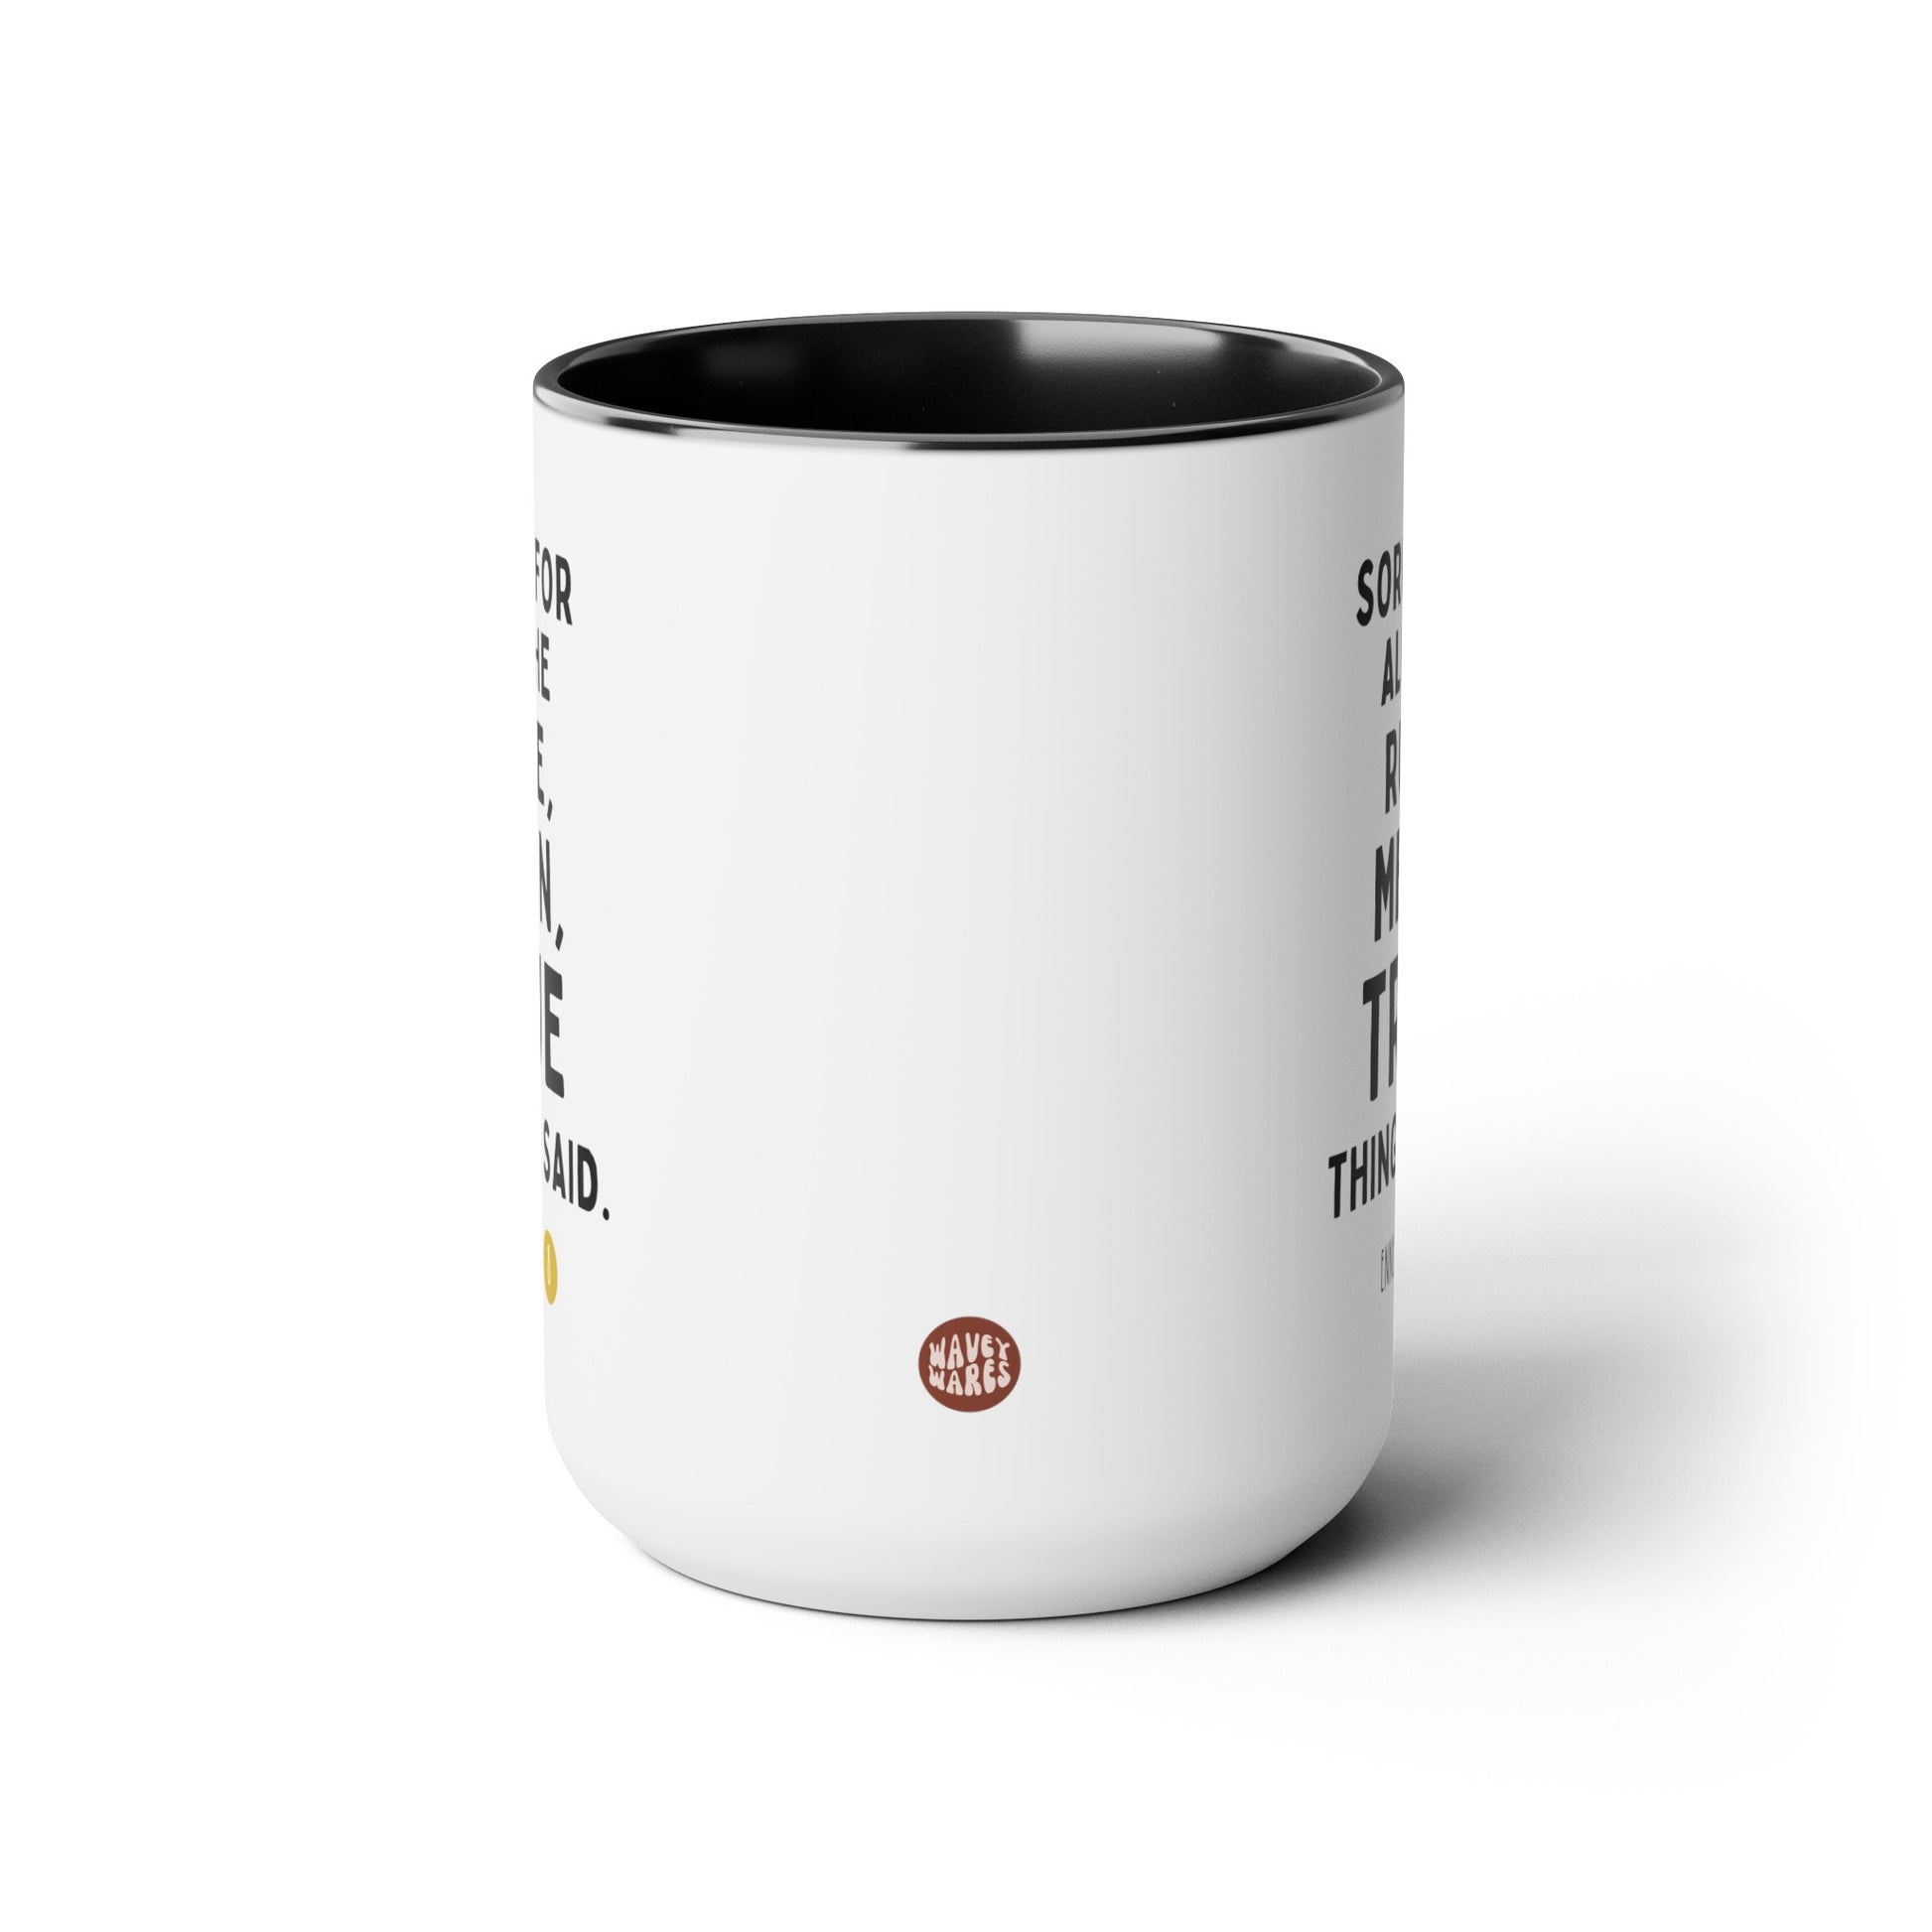 Sorry For All The Rude Mean True Things I Said Enneagram 8 15oz white with black accent funny large coffee mug gift for friend mbti personality test waveywares wavey wares wavywares wavy wares side